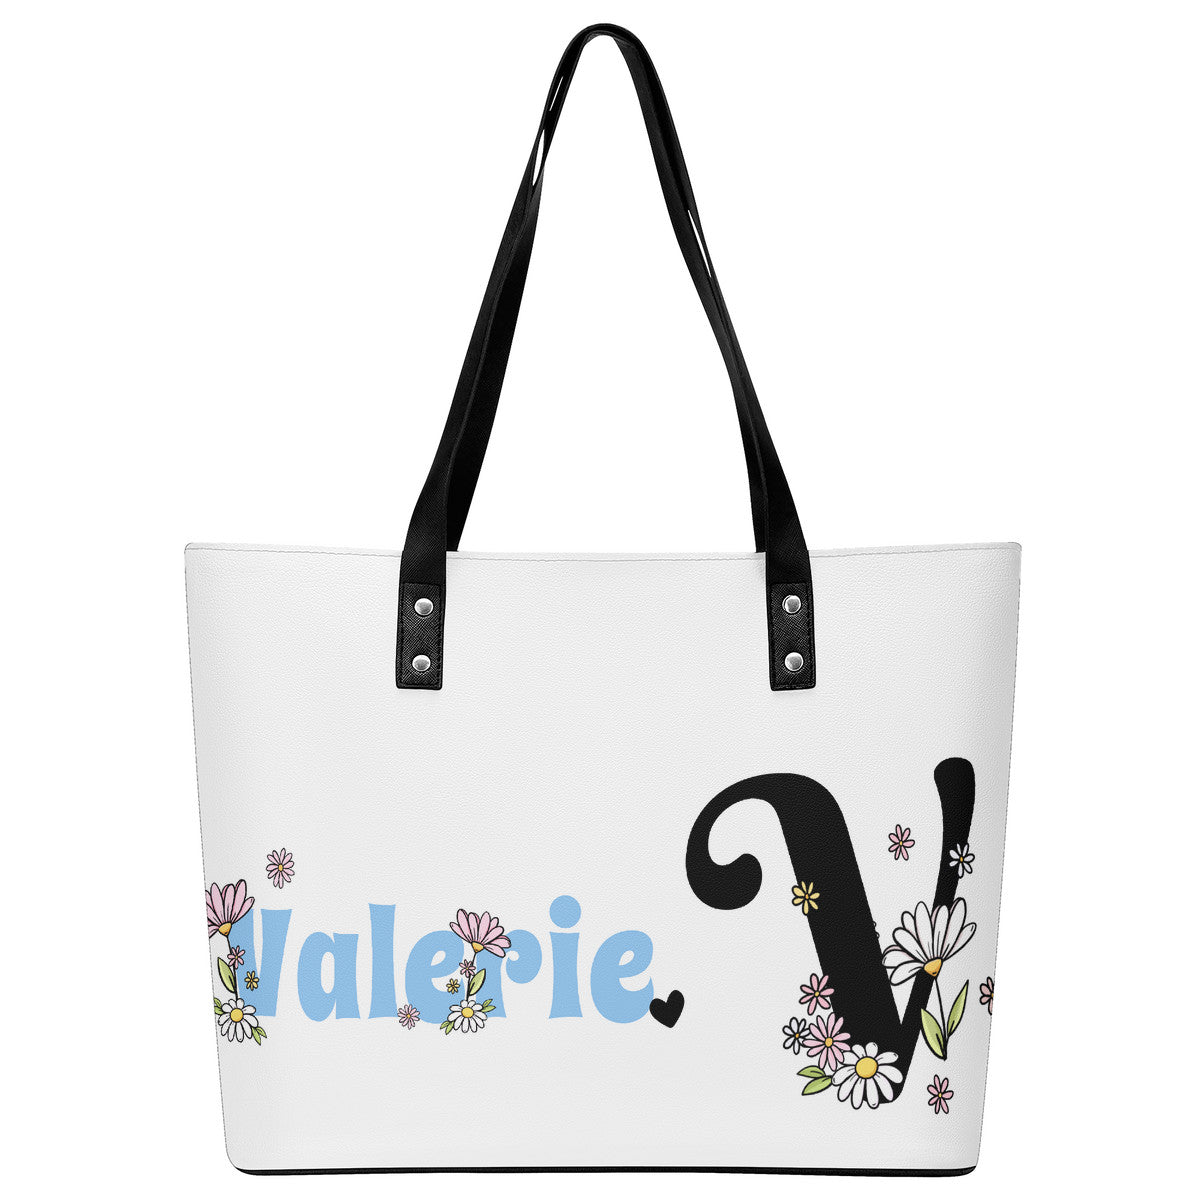 Personalize This Flowers Letters/Words PU Leather Handbag